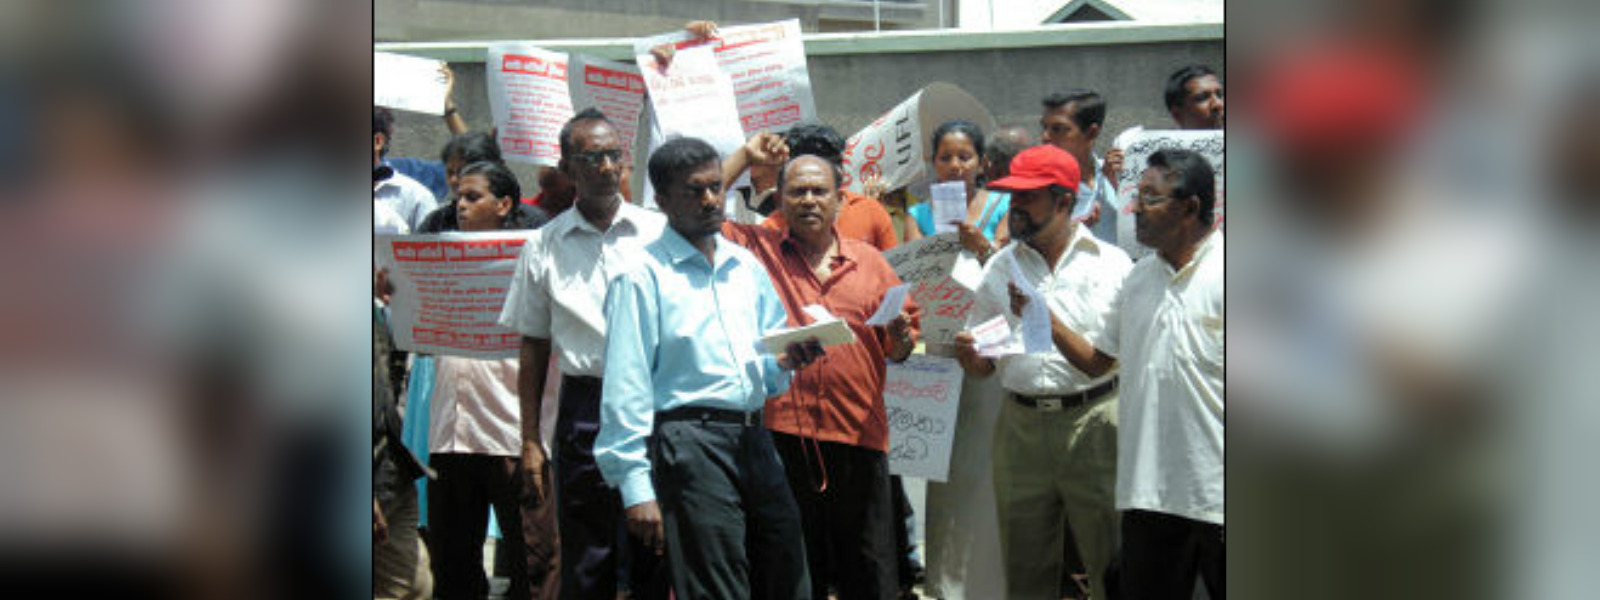 Several trade union actions called off